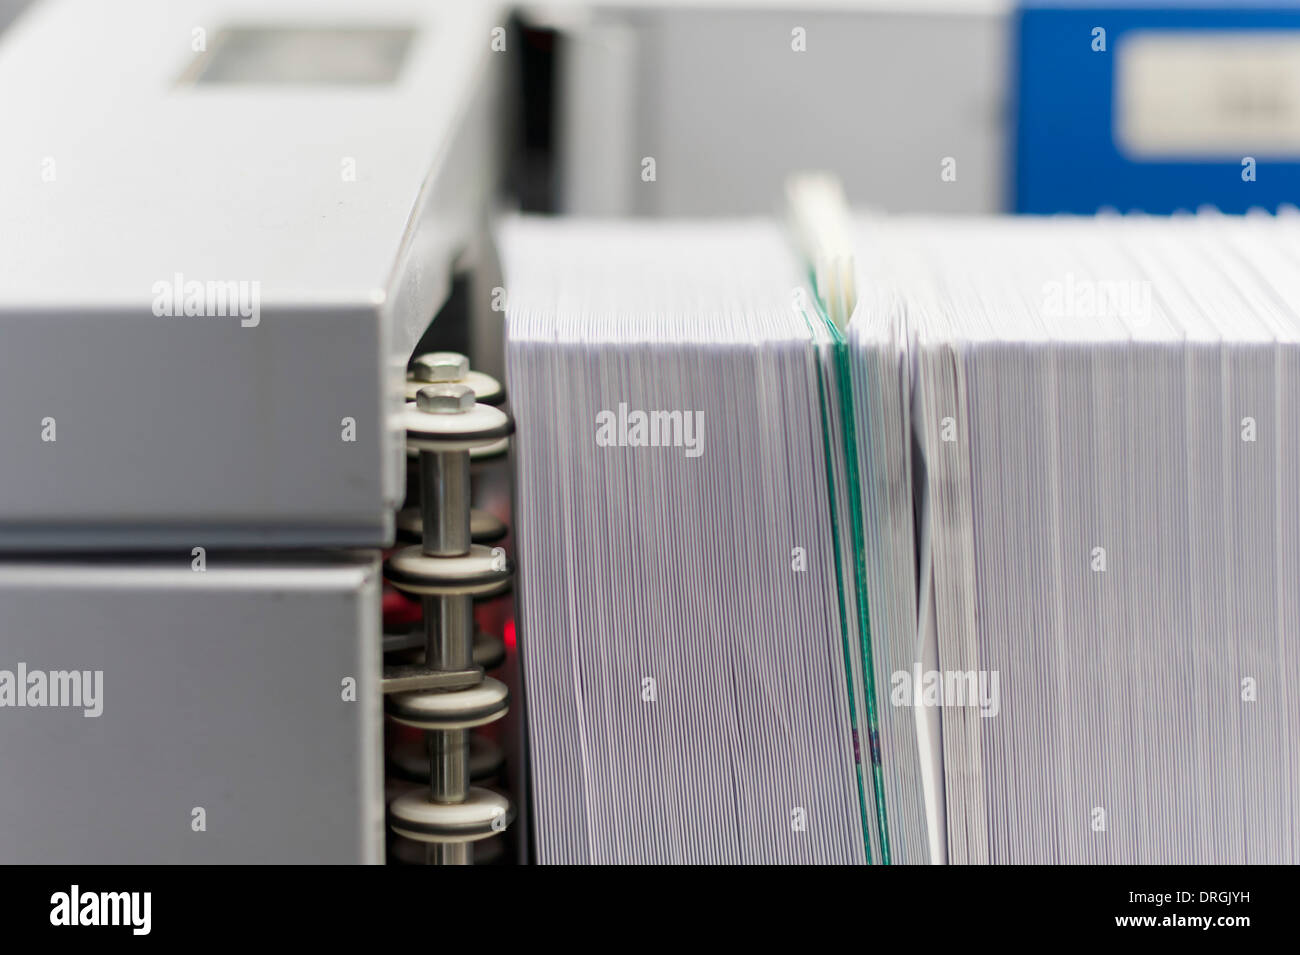 A machine for automatic sorting of mail items is processing a large batch of letters Stock Photo